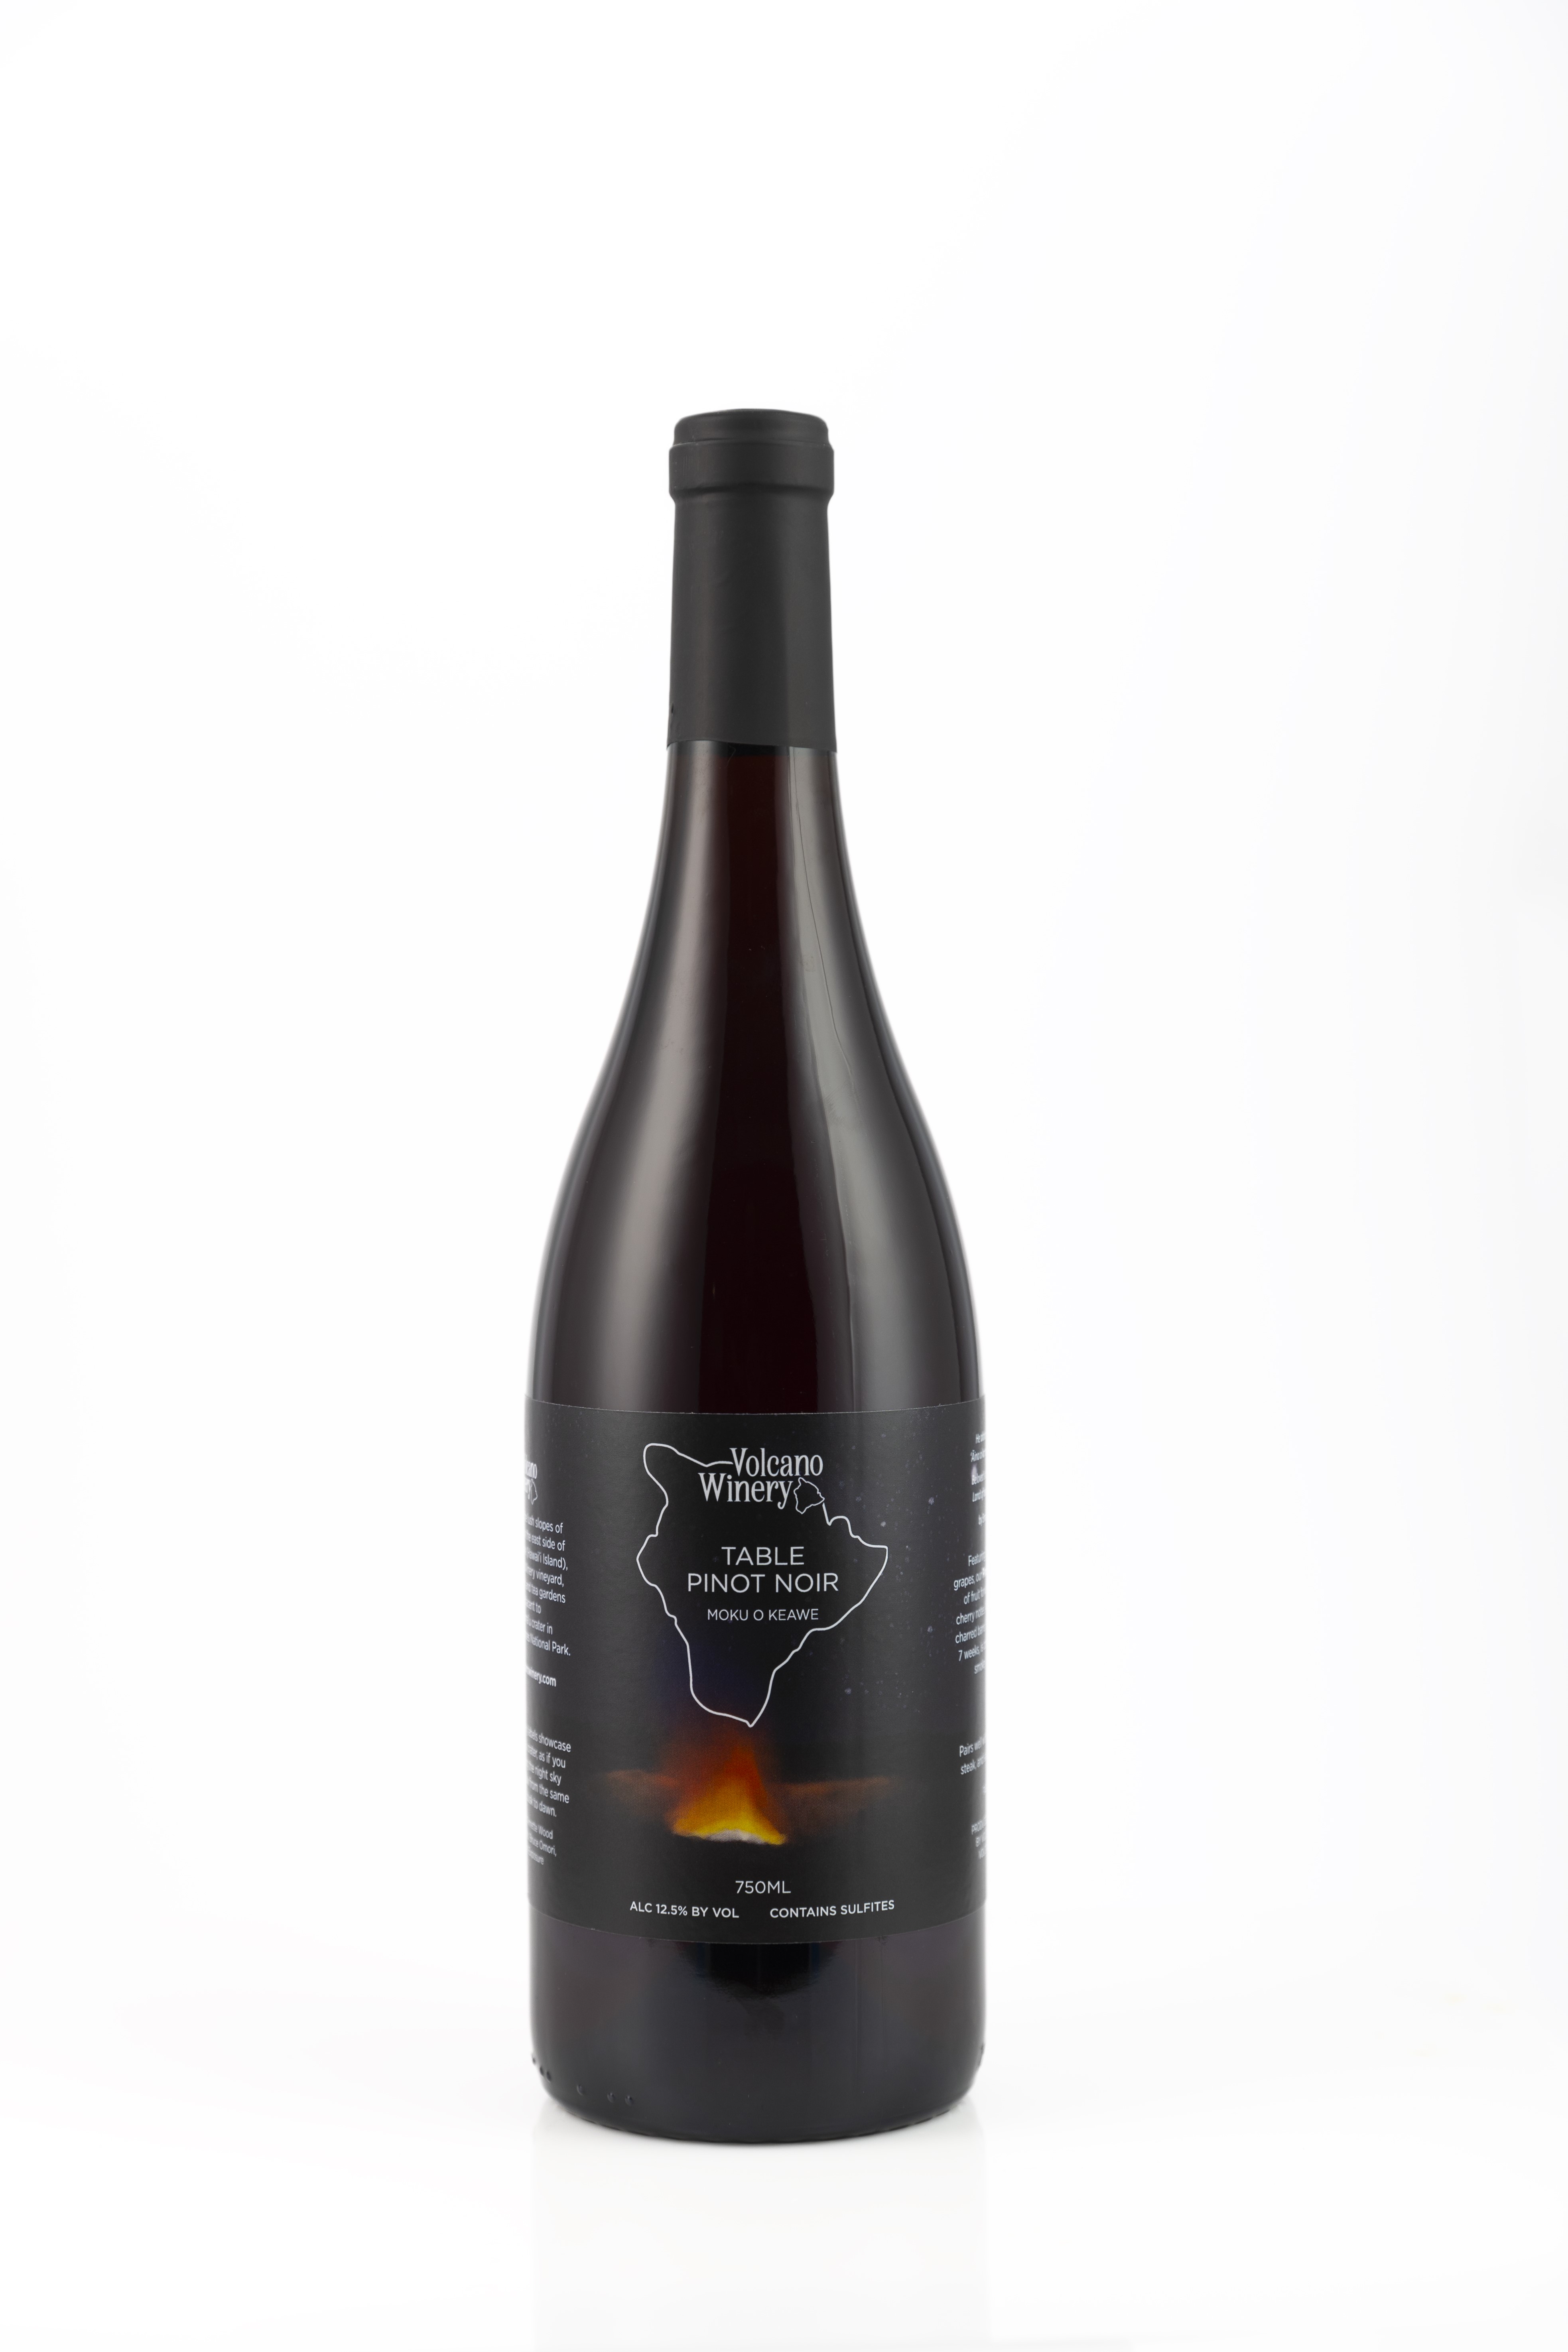 Product Image for Table Pinot Noir 750ml